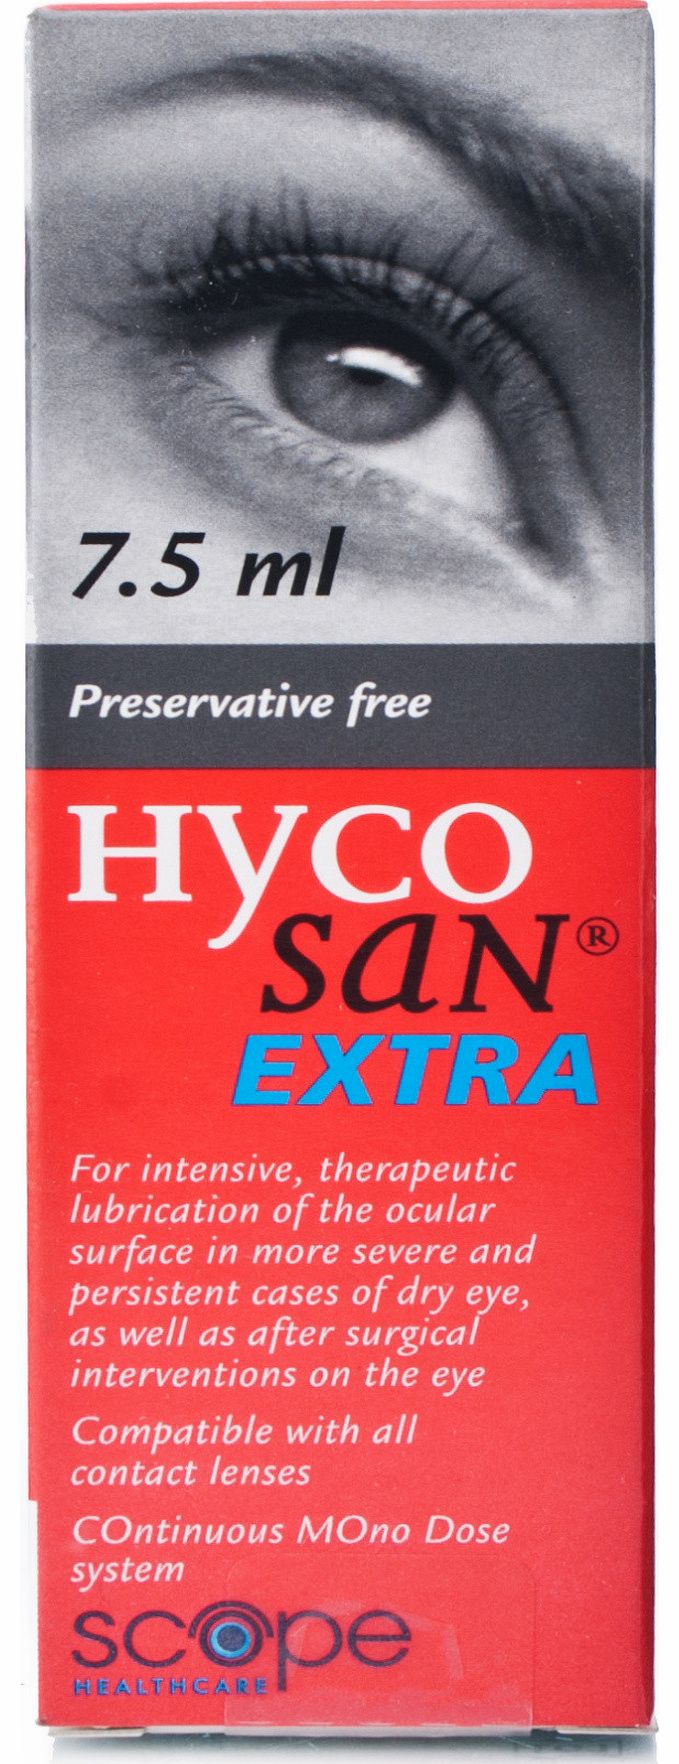 Hycosan Extra contains 0.2% Hyaluronic Acid and is suitable for more severe cases of dry eye. The added strength gives a solution which is four times more viscous than Hycosan, but still doesnt blur your vision. Hycosan Extra is preservative free and